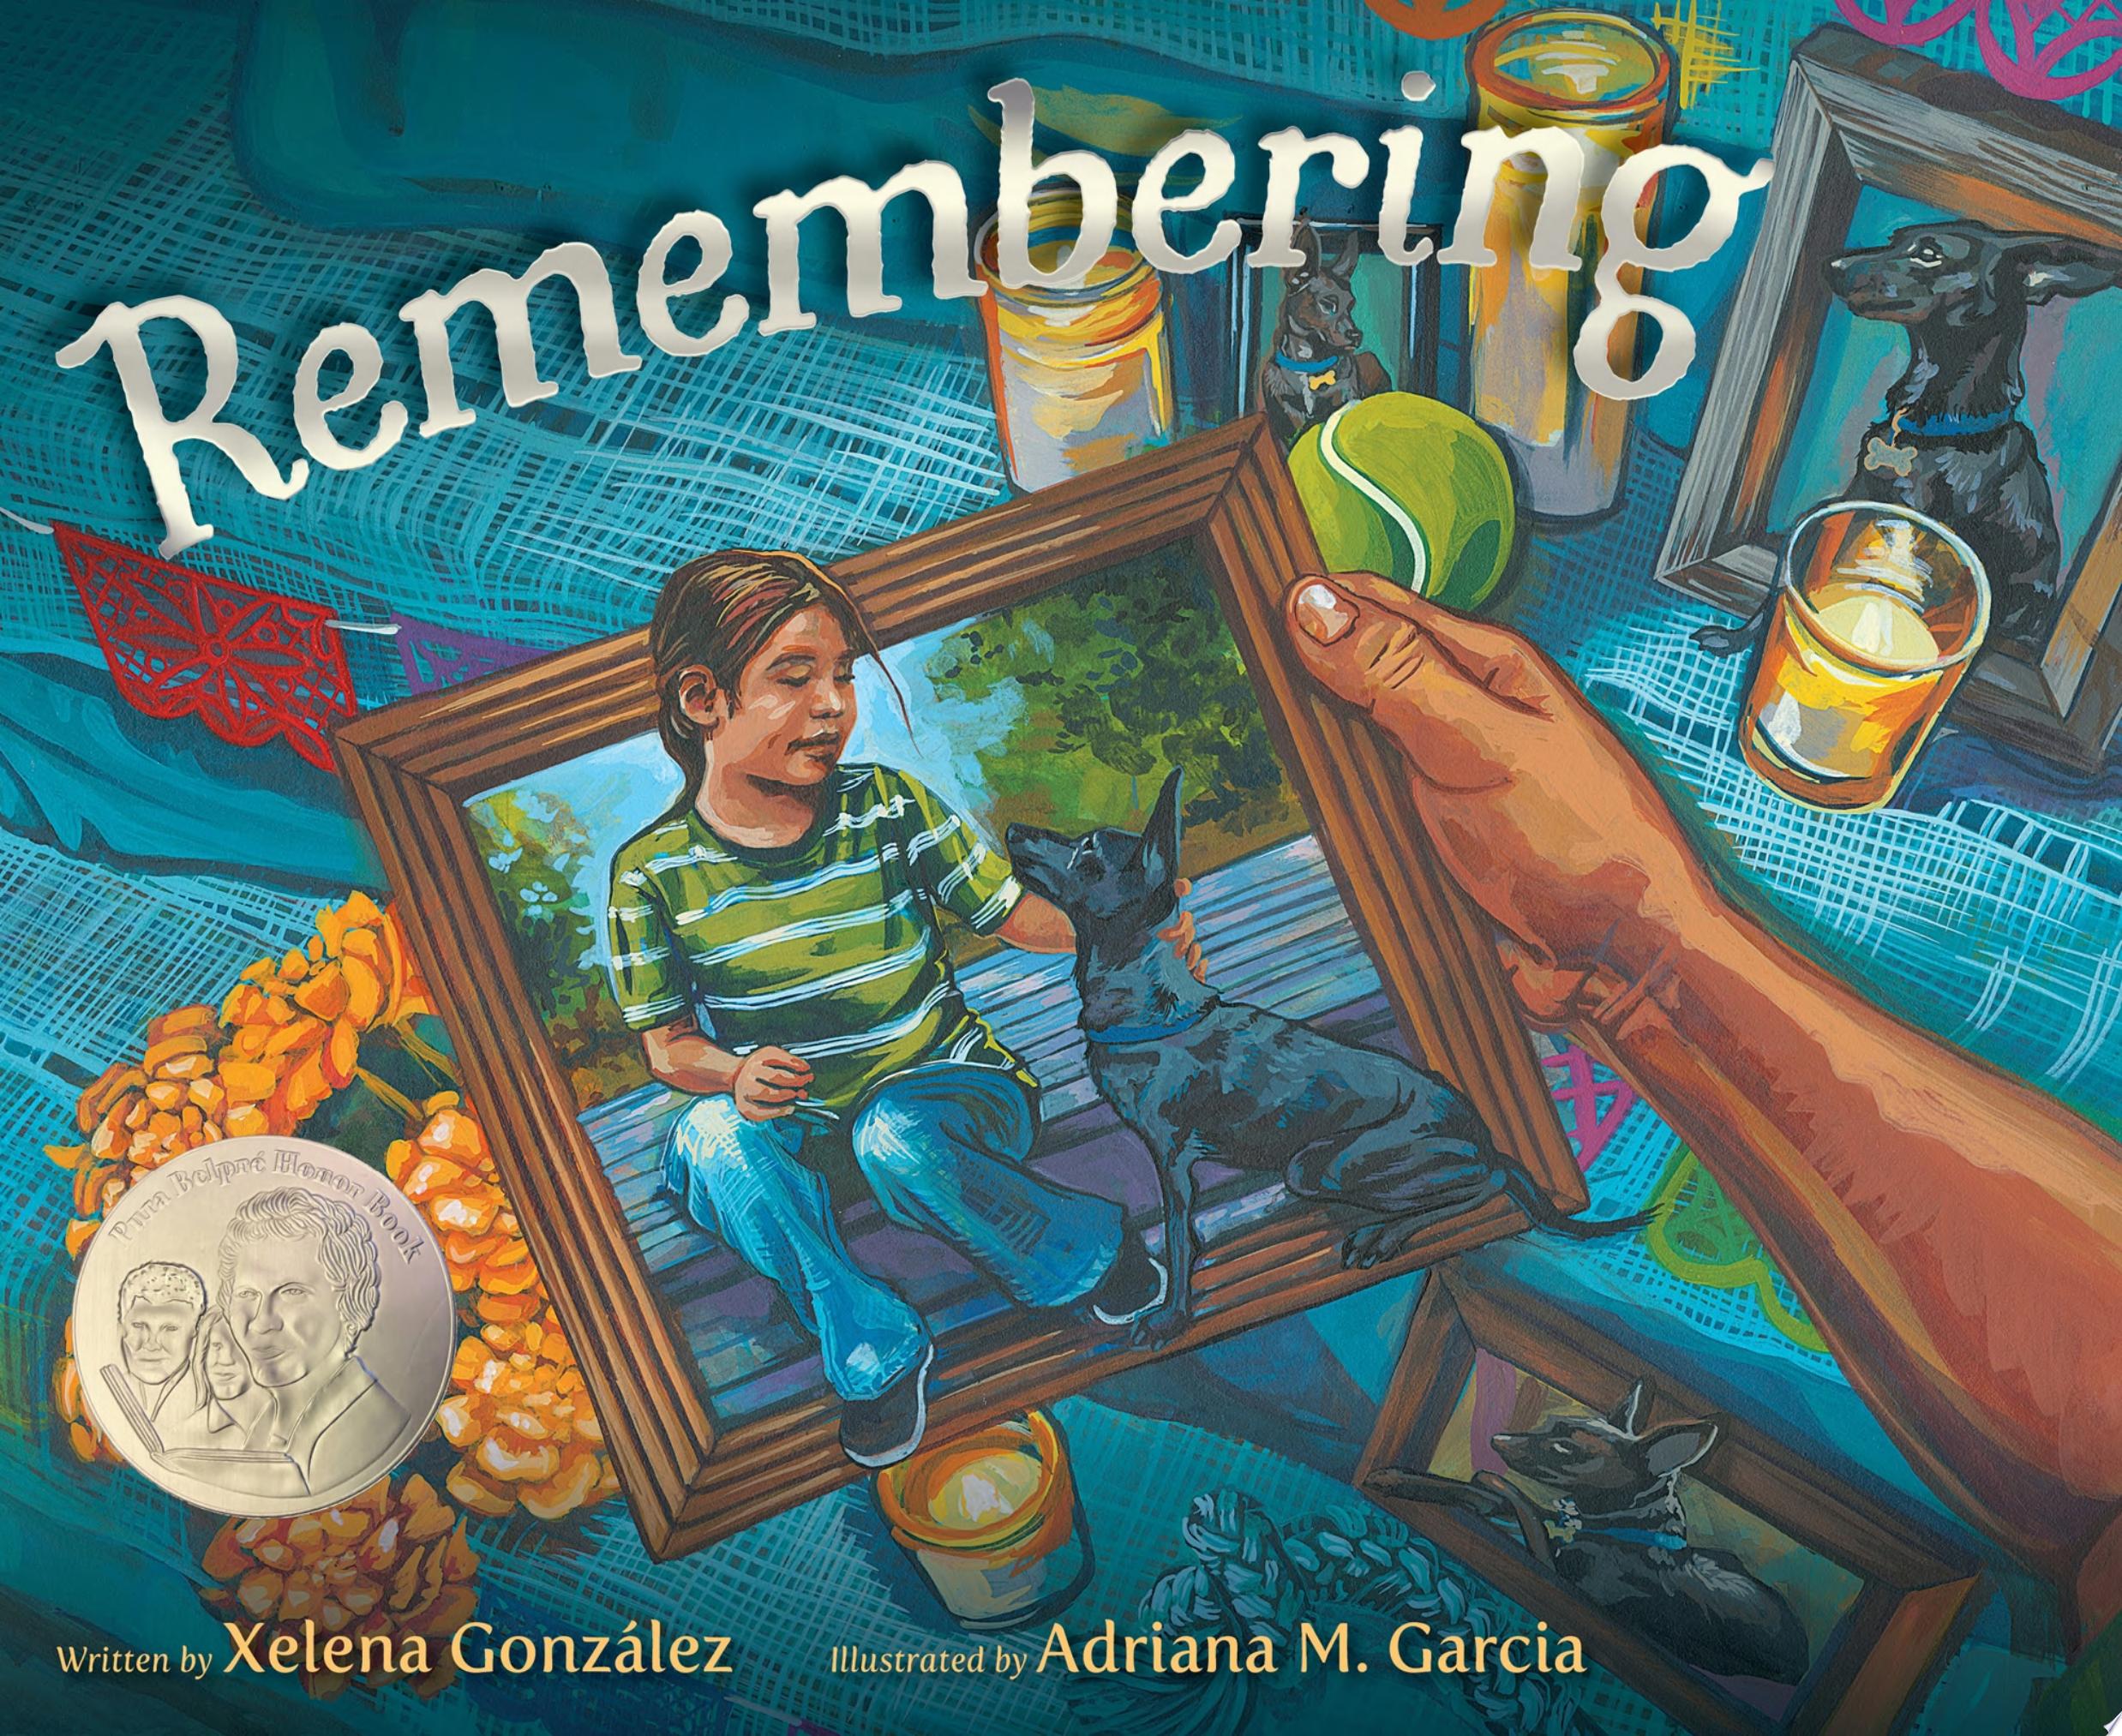 Image for "Remembering"